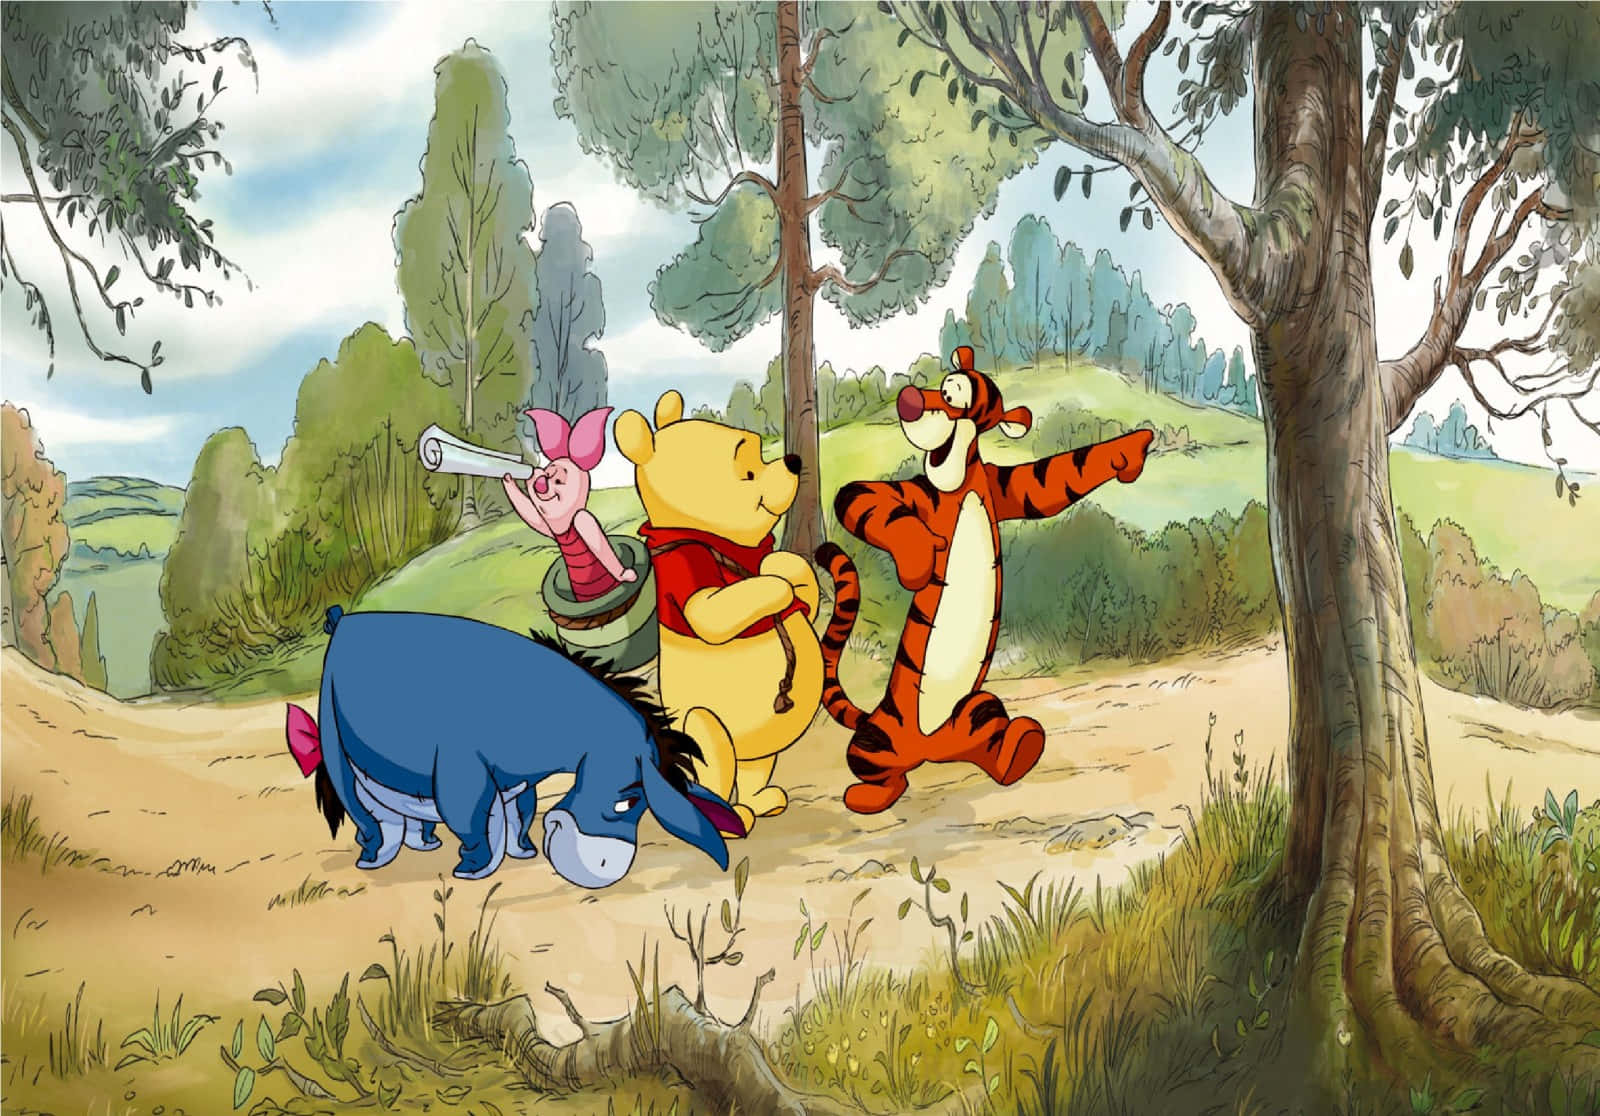 “Explore the Hundred Acre Woods”